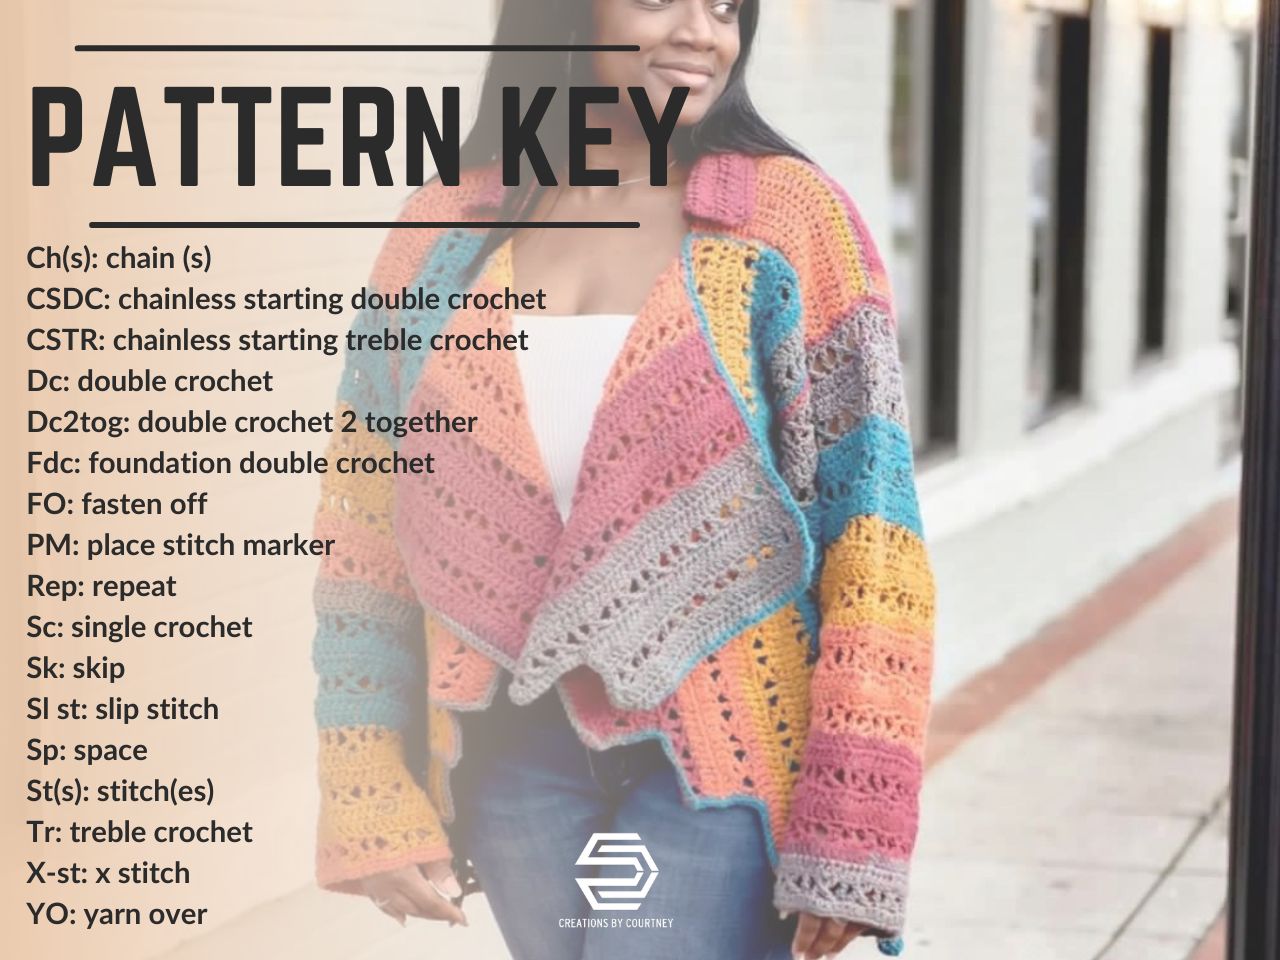 The Xcapade Cardigan modeled by an African American woman is faded in the background. The foreground shows the pattern key of crochet stitch abbreviations and the Creations by Courtney logo for the crochet along.